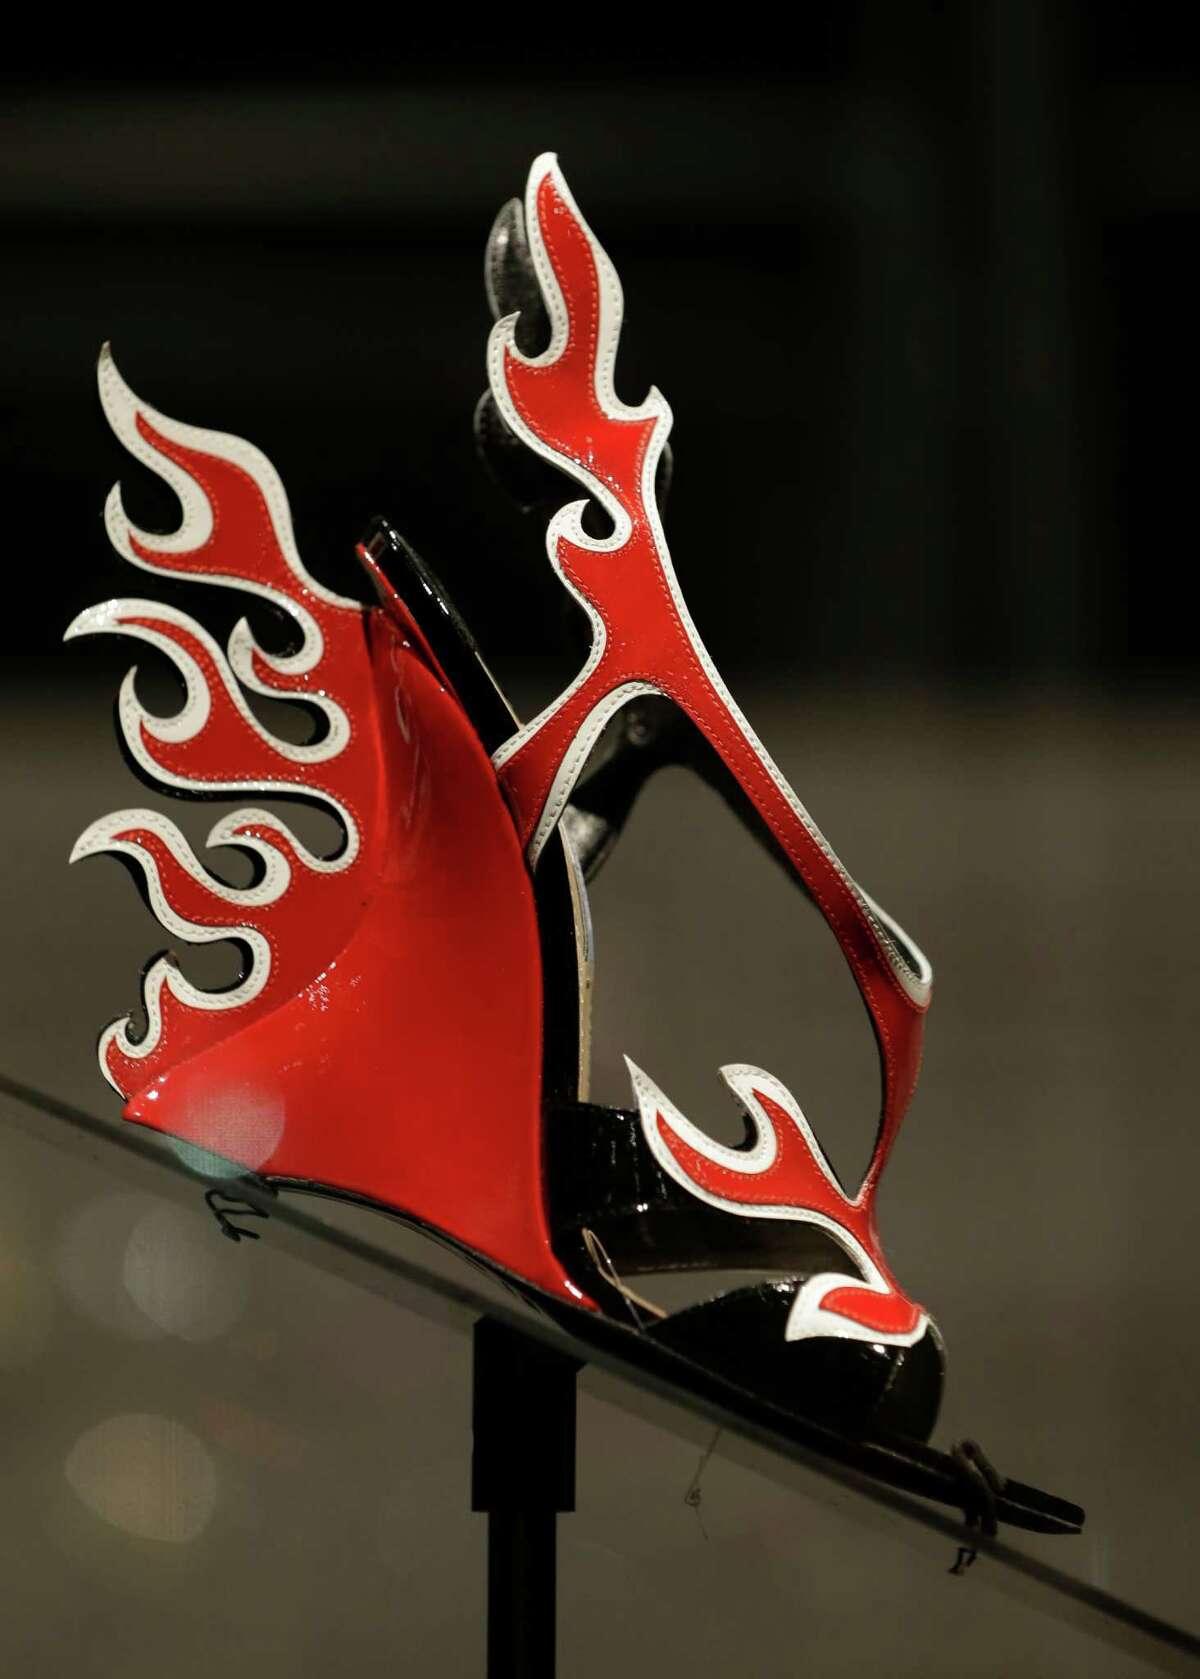 This Feb. 11, 2013 photo shows a red and white patent leather flame Prada sandal displayed at the "Shoe Obsession" exhibit at The Museum at the Fashion Institute of Technology Museum in New York. The exhibition, showing off 153 specimens, runs through April 13.